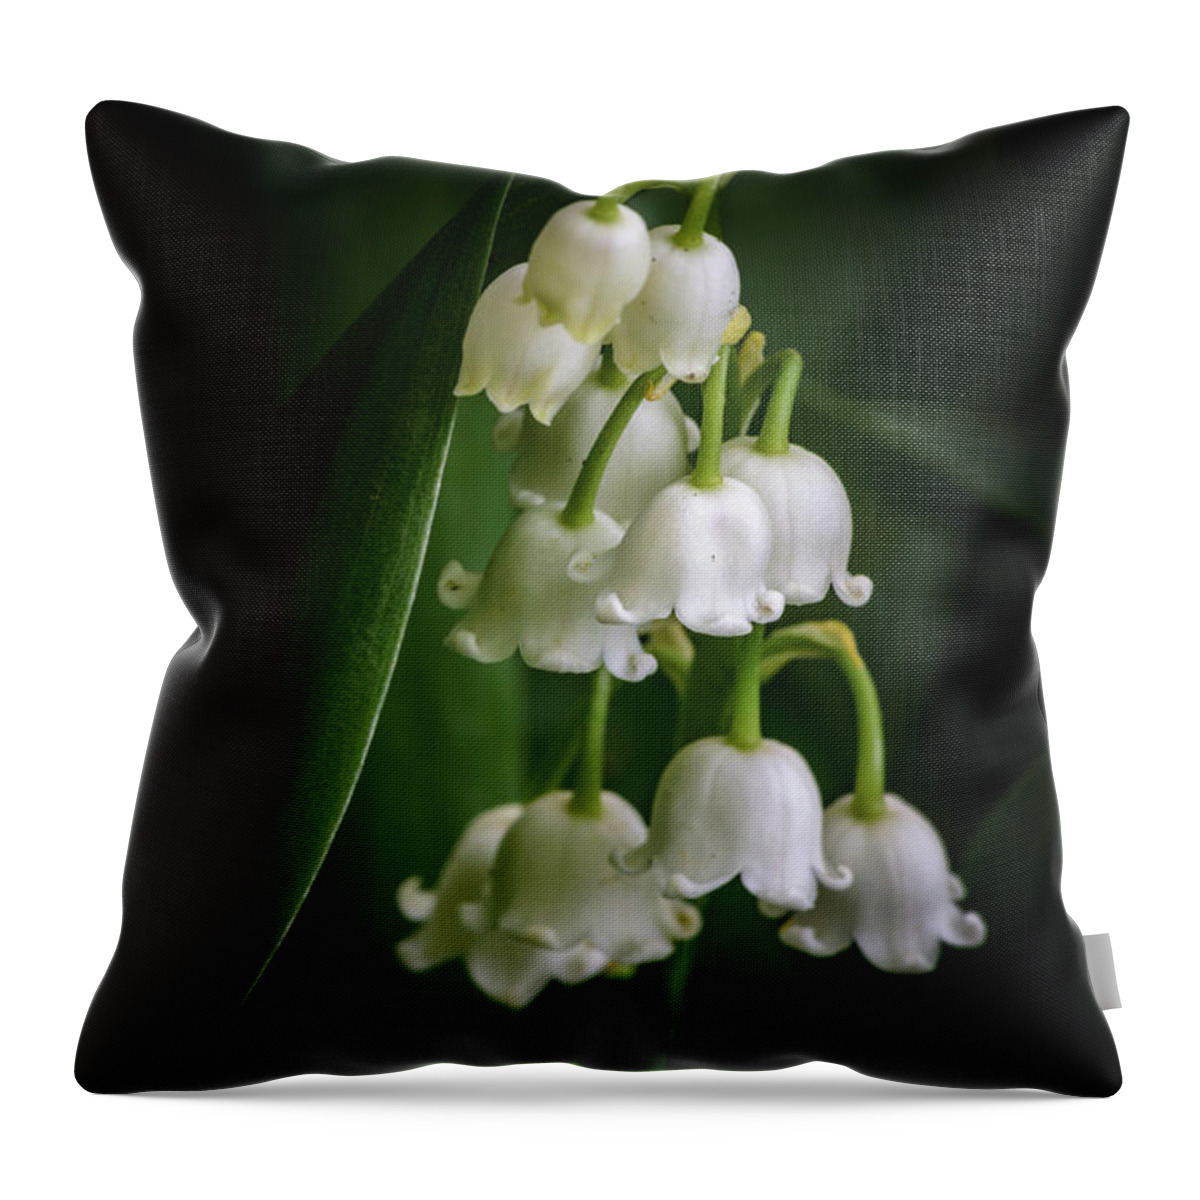 Lily Of The Valley Throw Pillow featuring the photograph Lily Of The Valley Bouquet by Tamara Becker